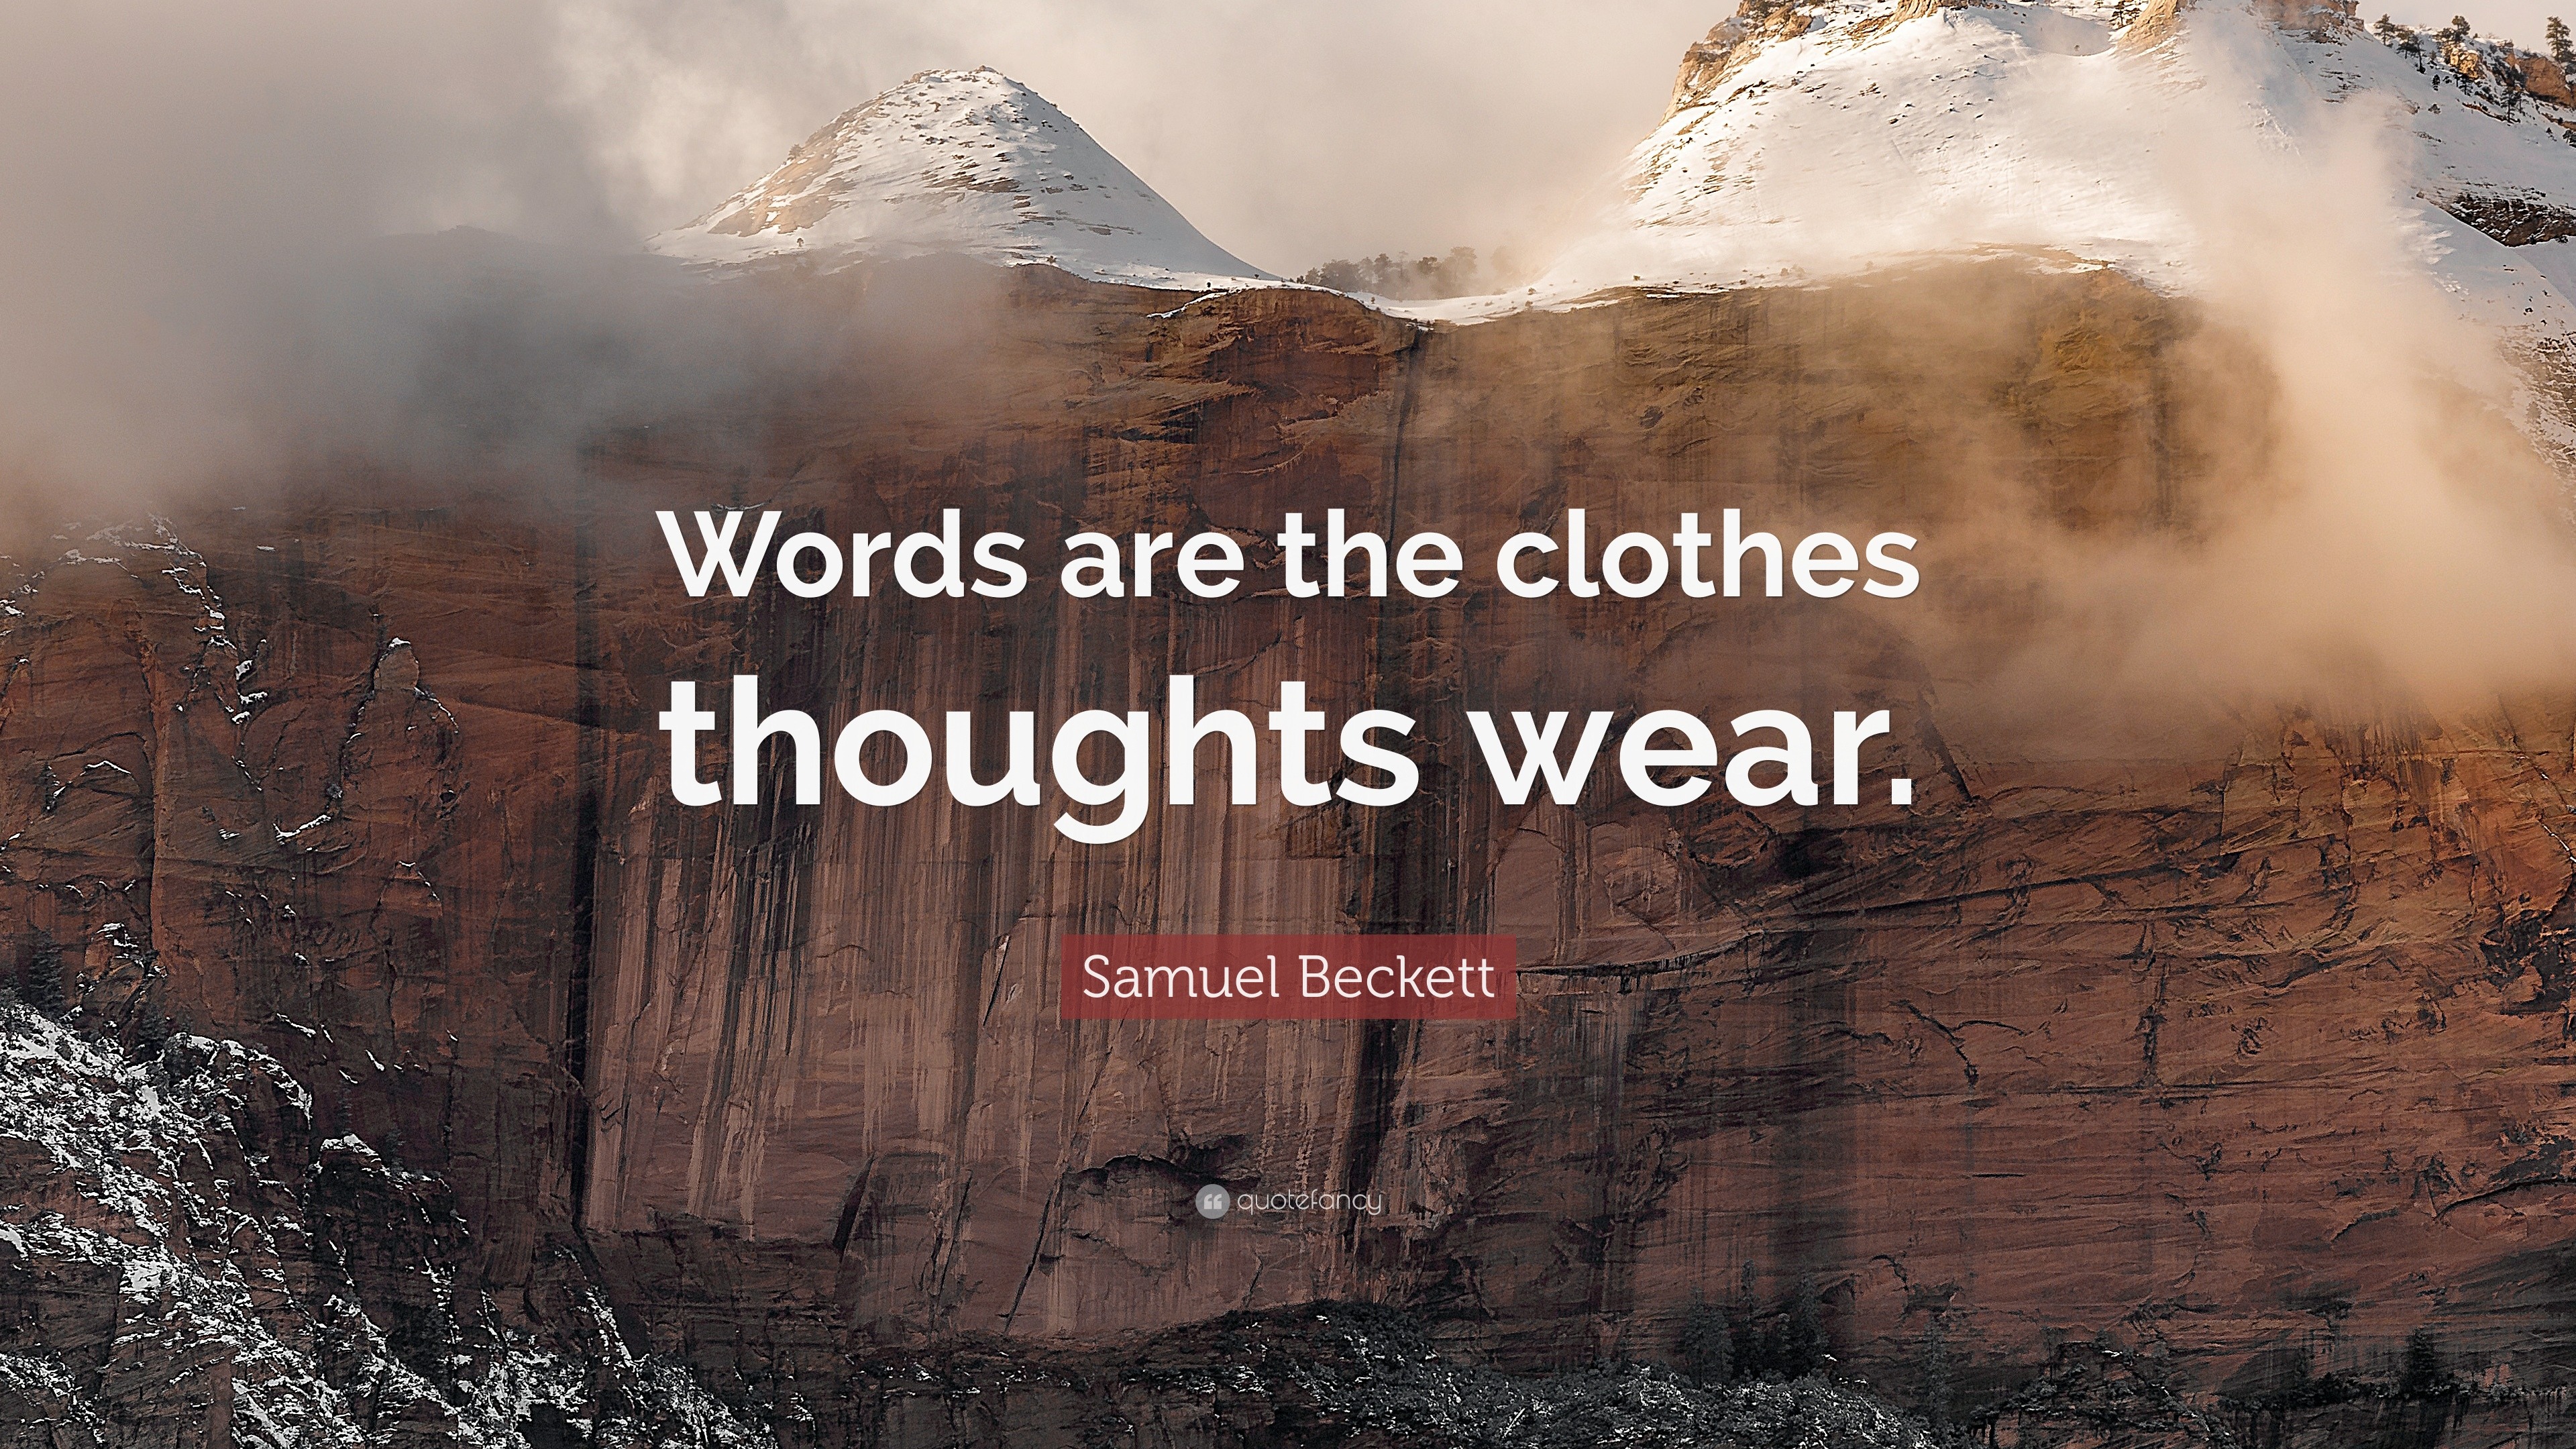 Samuel Beckett Quote: “Words are the clothes thoughts wear.” (12